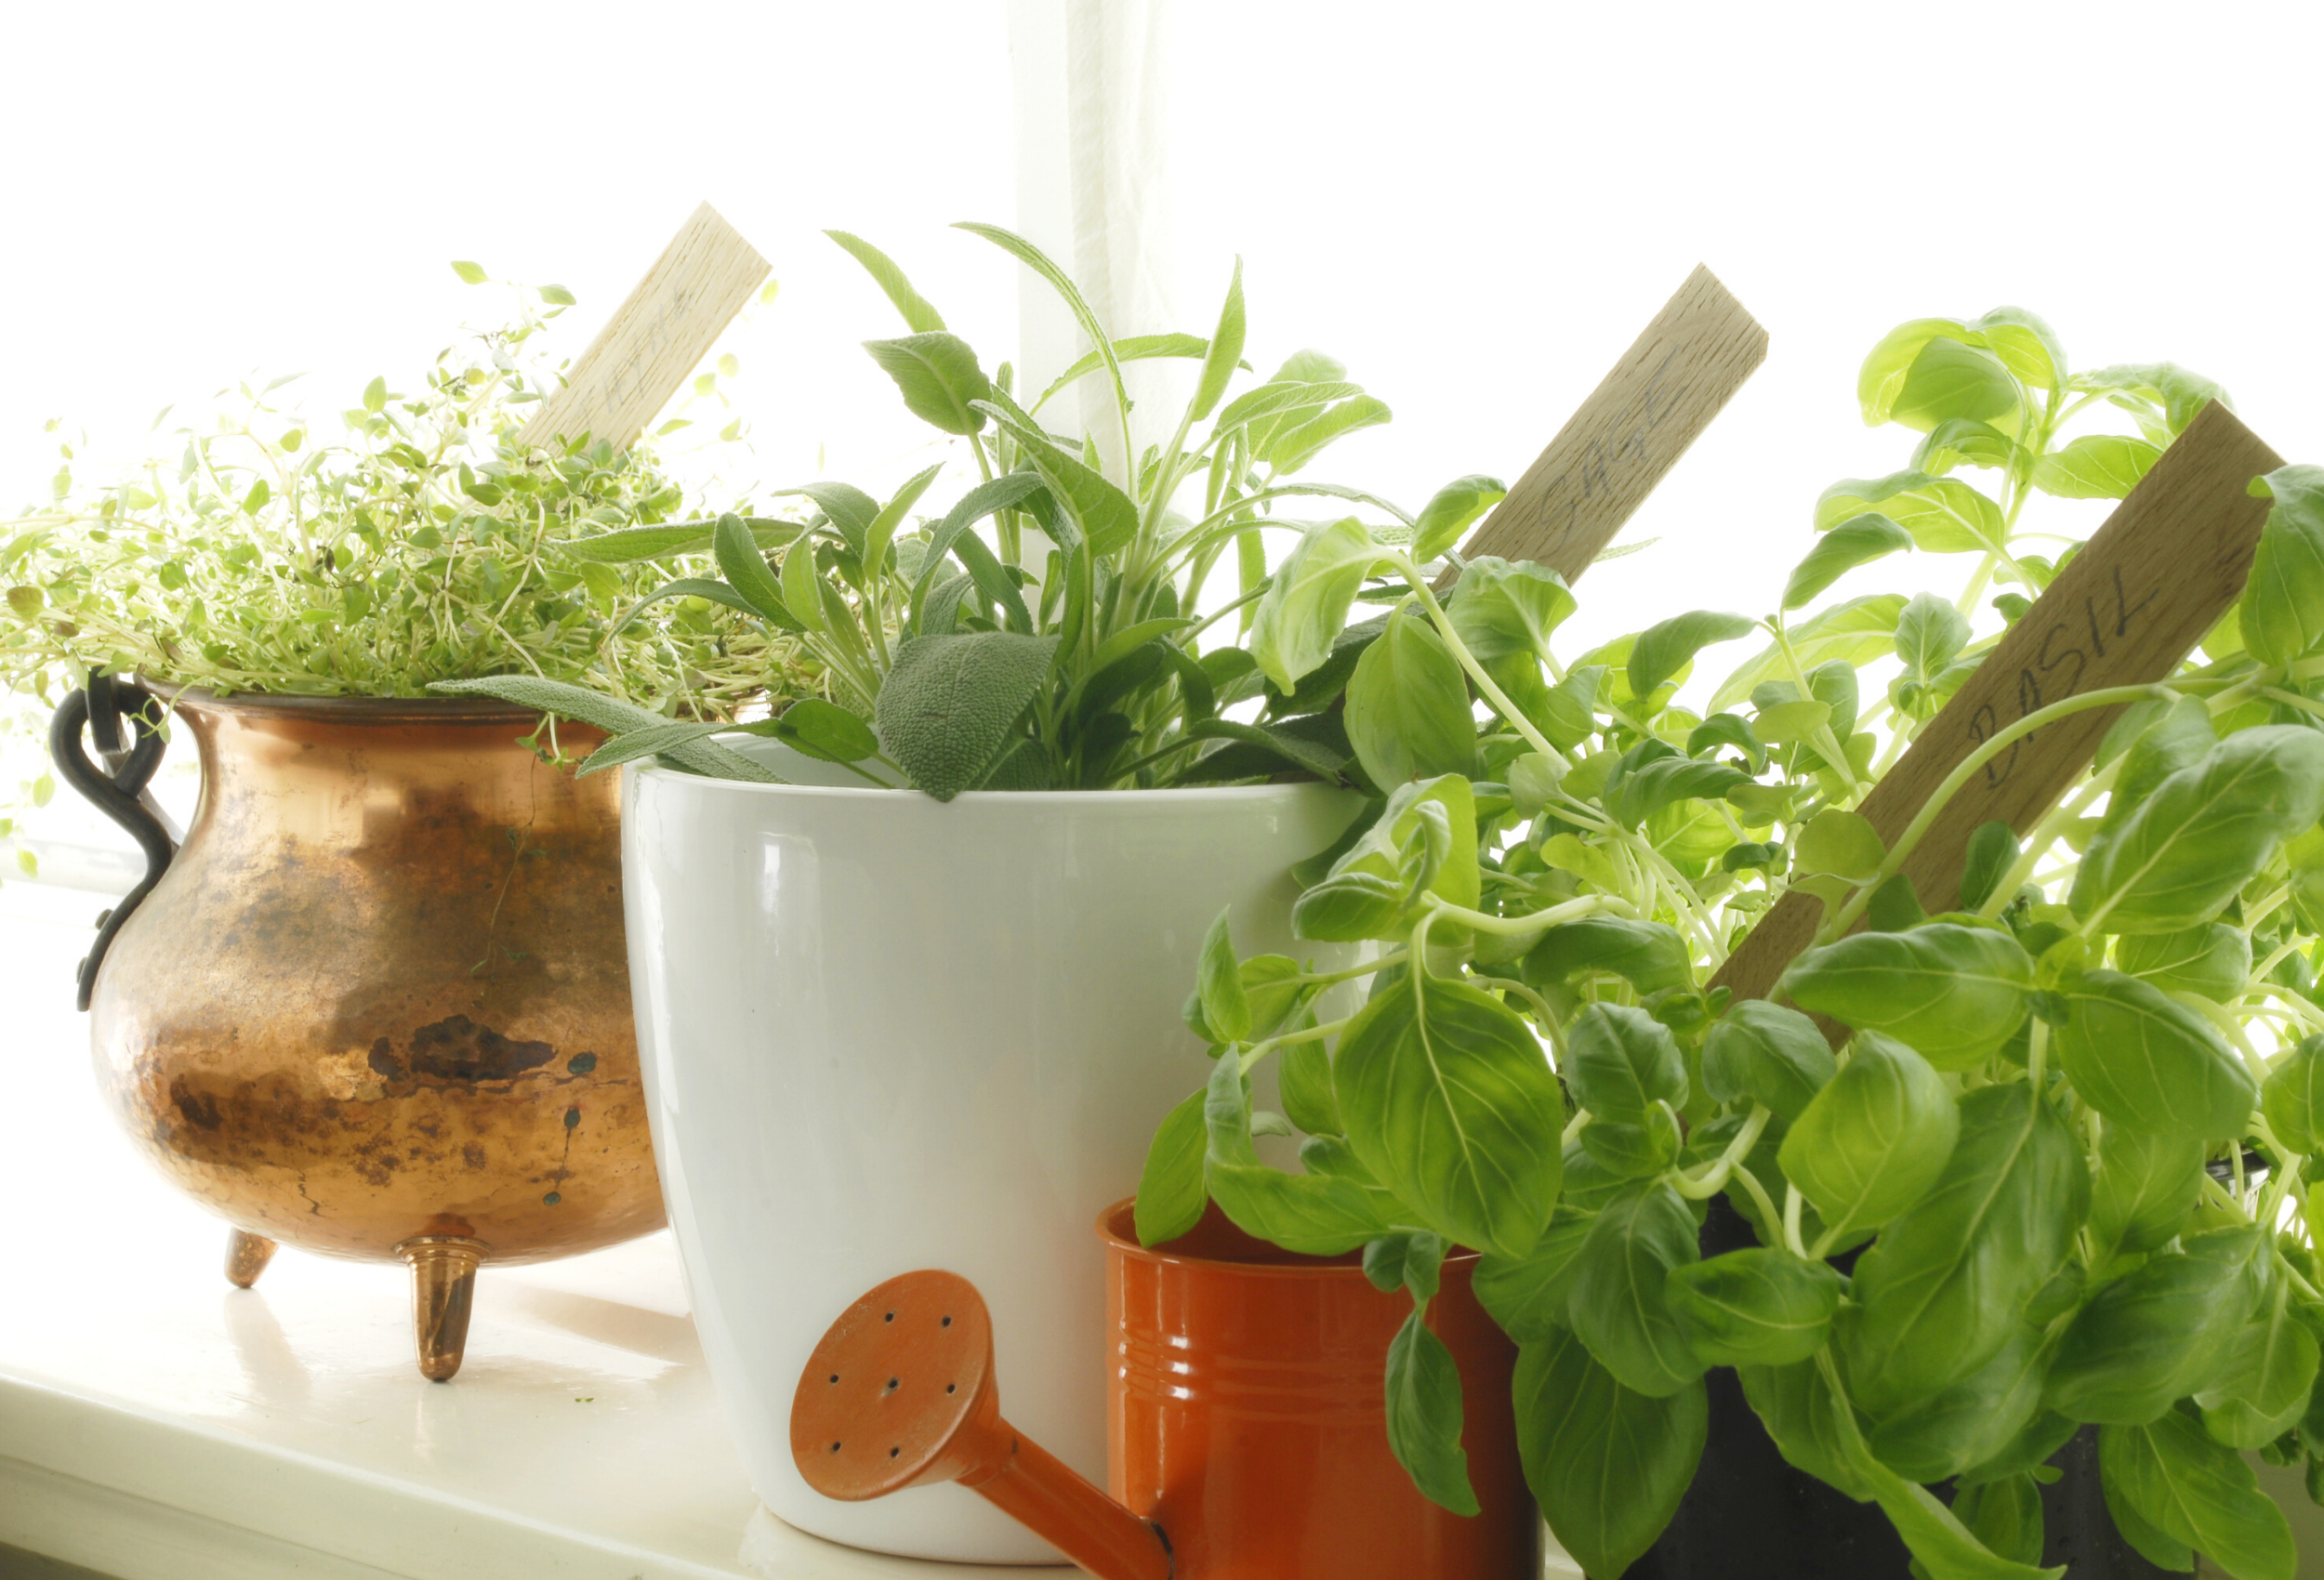 Spring into Action: Freshen Up Your Kitchen With a Little Green Stuff | Eastbrook Homes